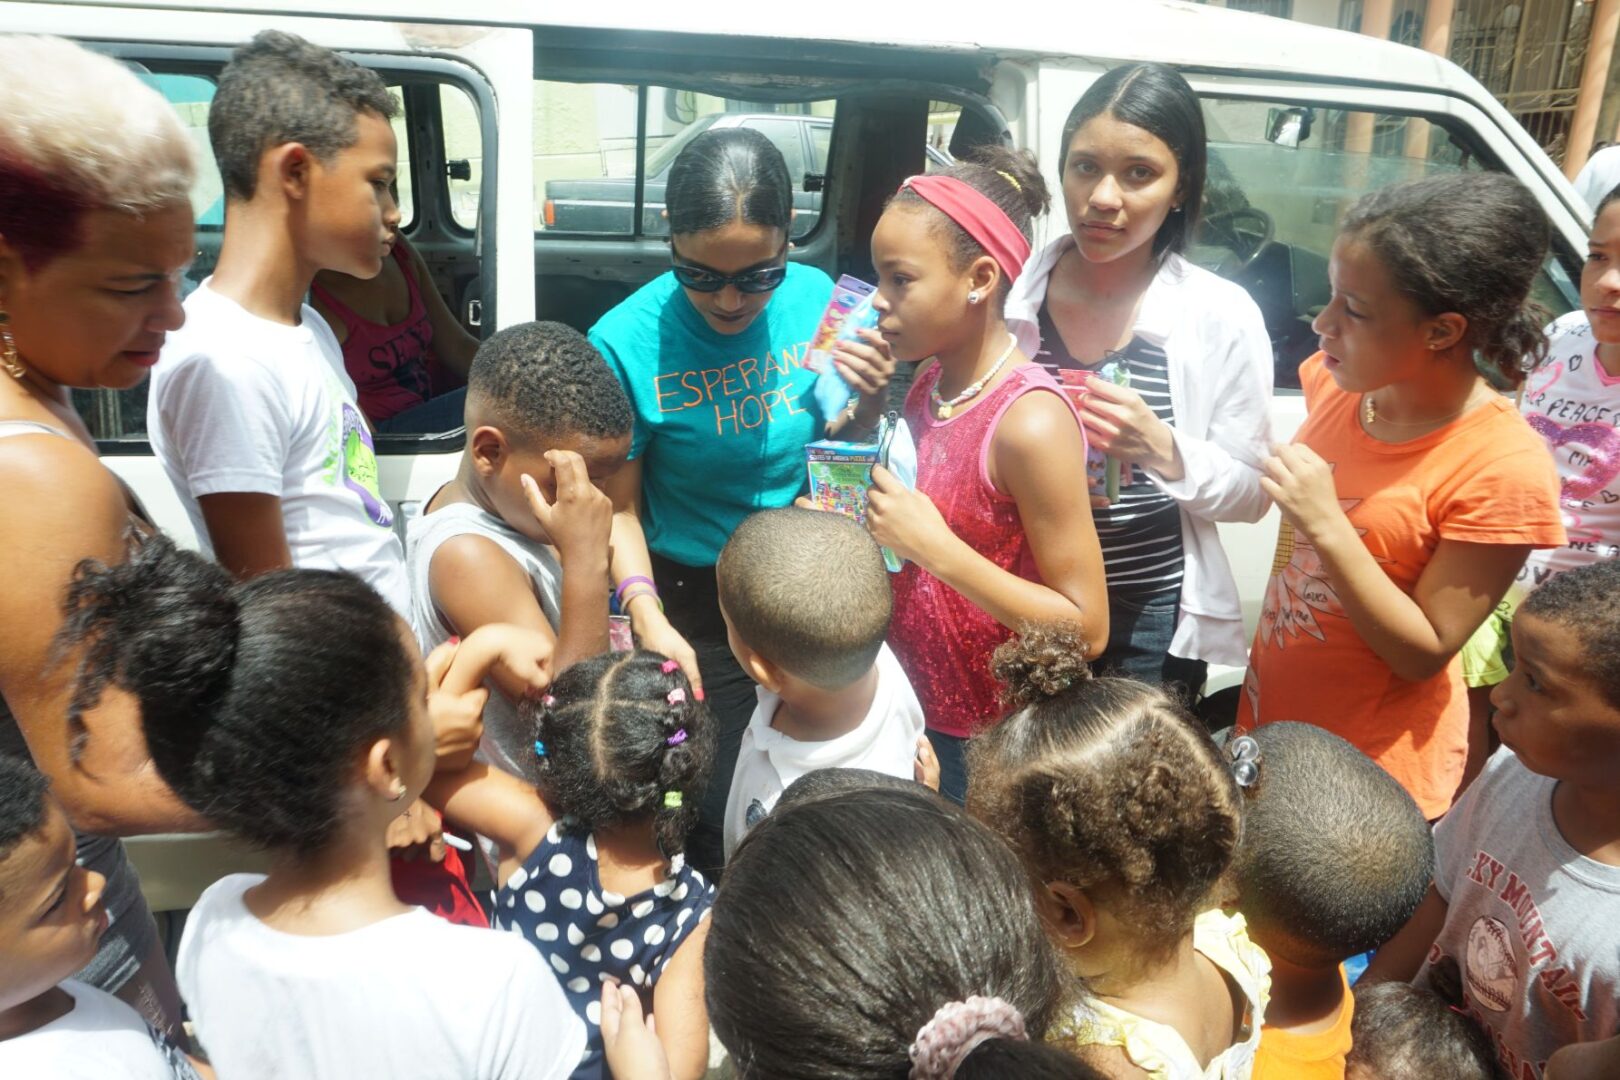 Our staff crowded by children outside the car, giving away toys